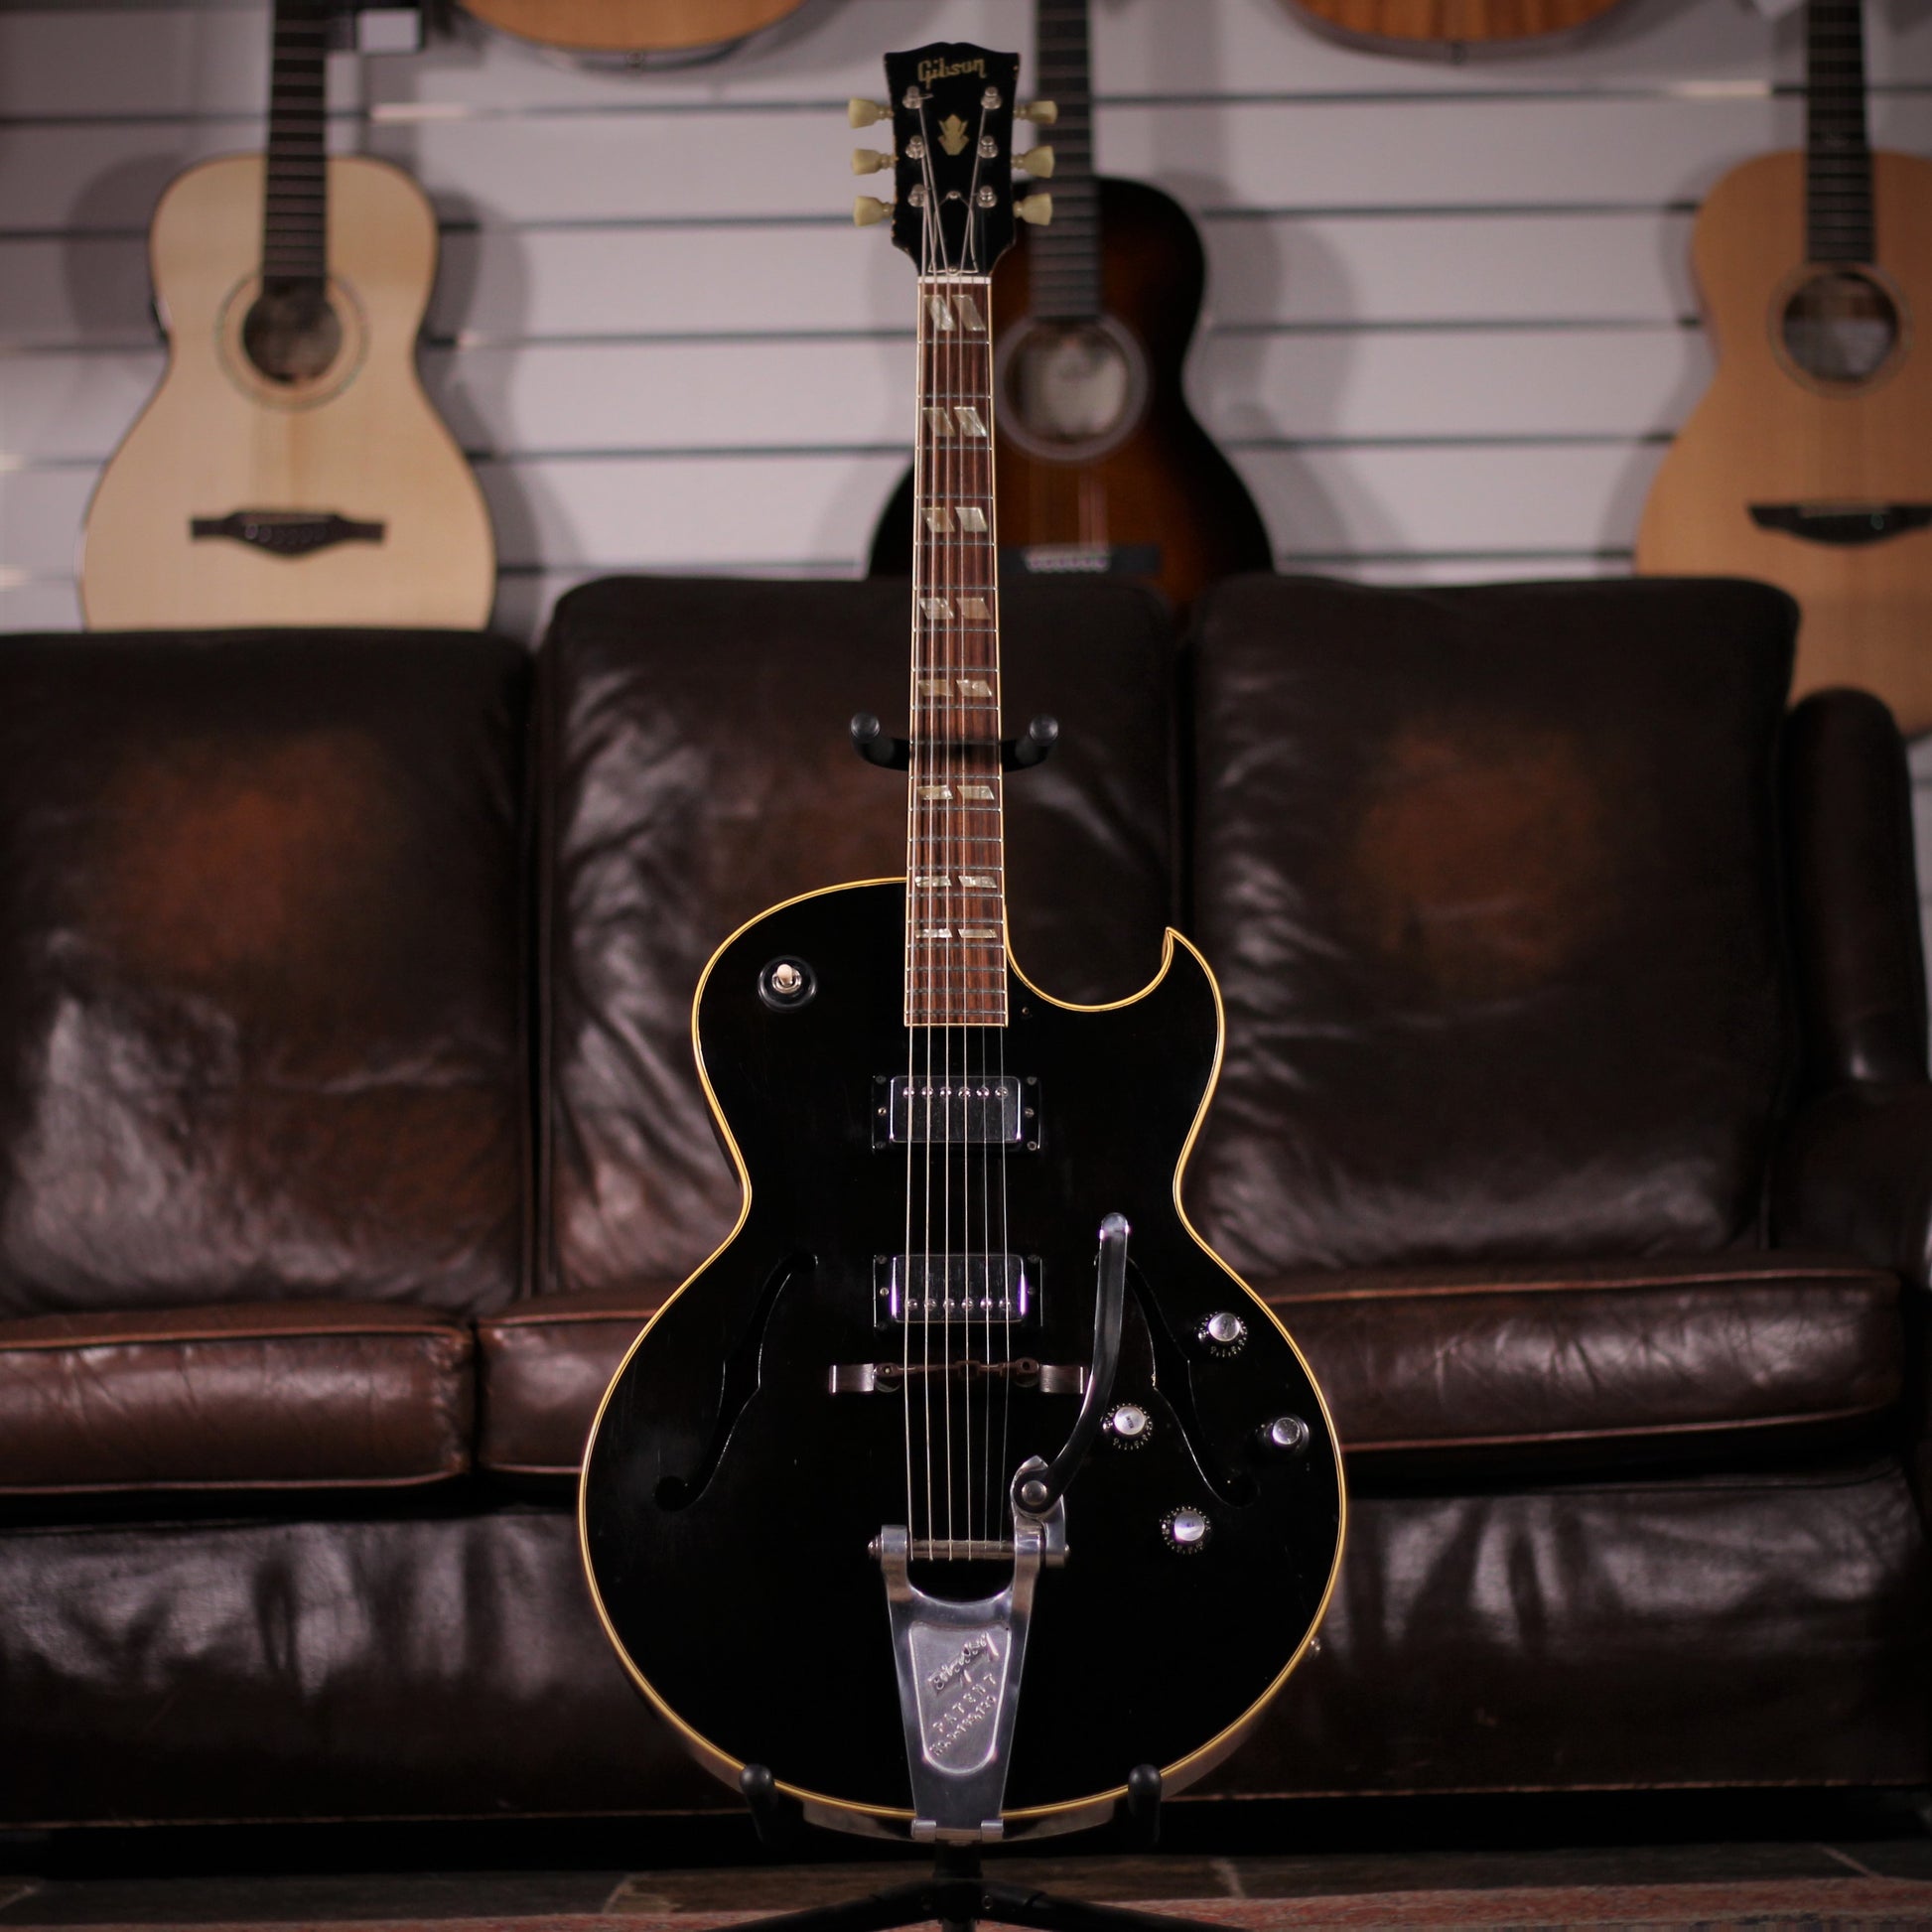 Used - Gibson ES175 1966 full